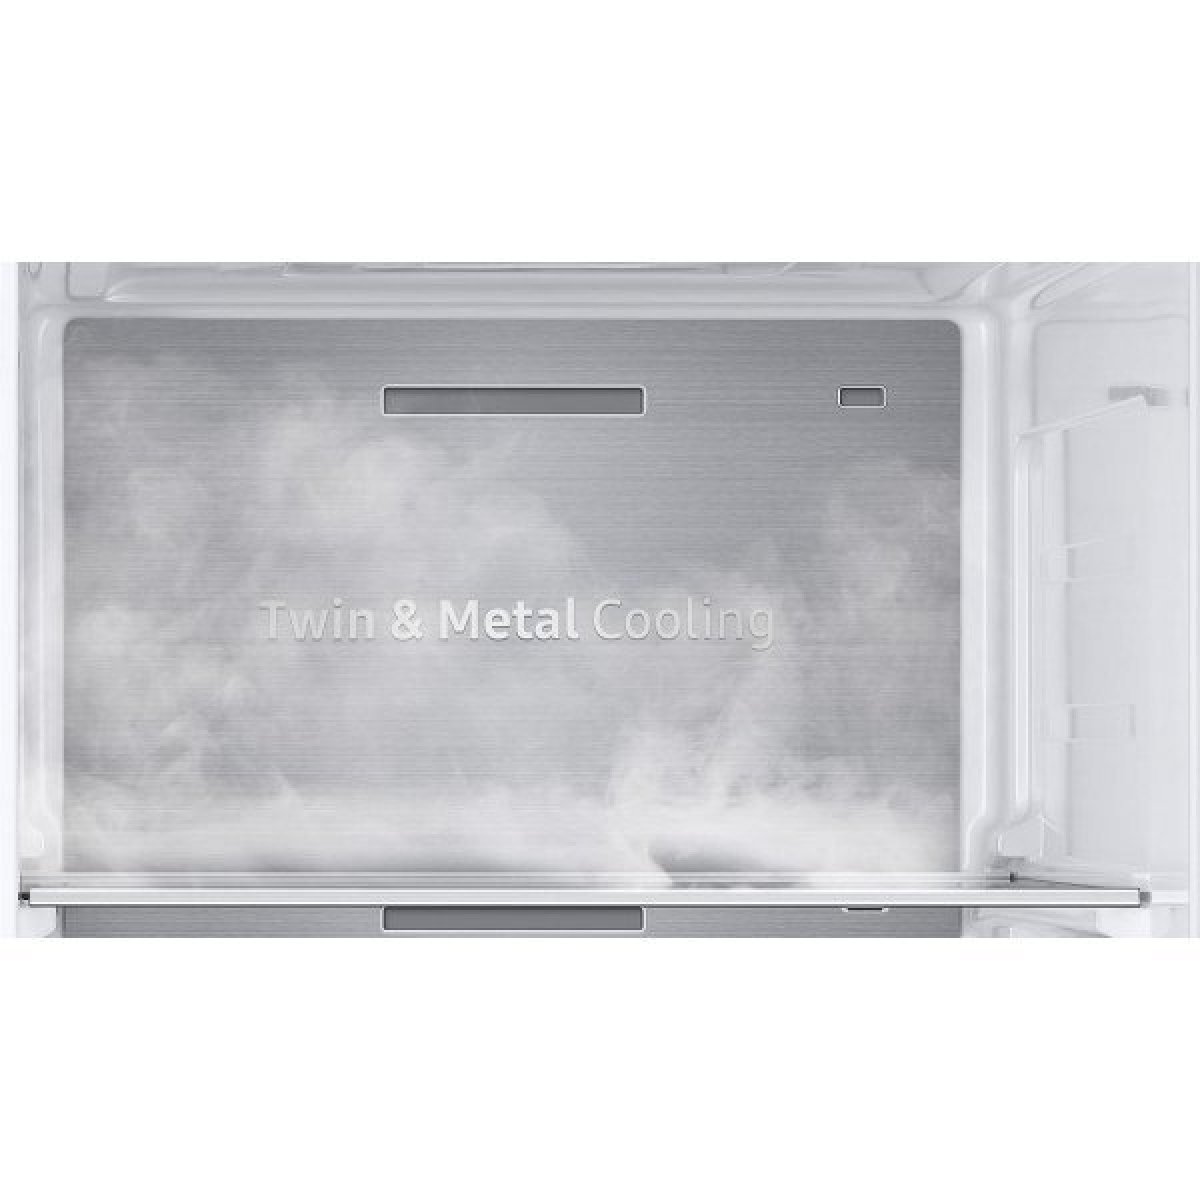 Technologie Metal Cooling a technologie Precise Chef Cooling